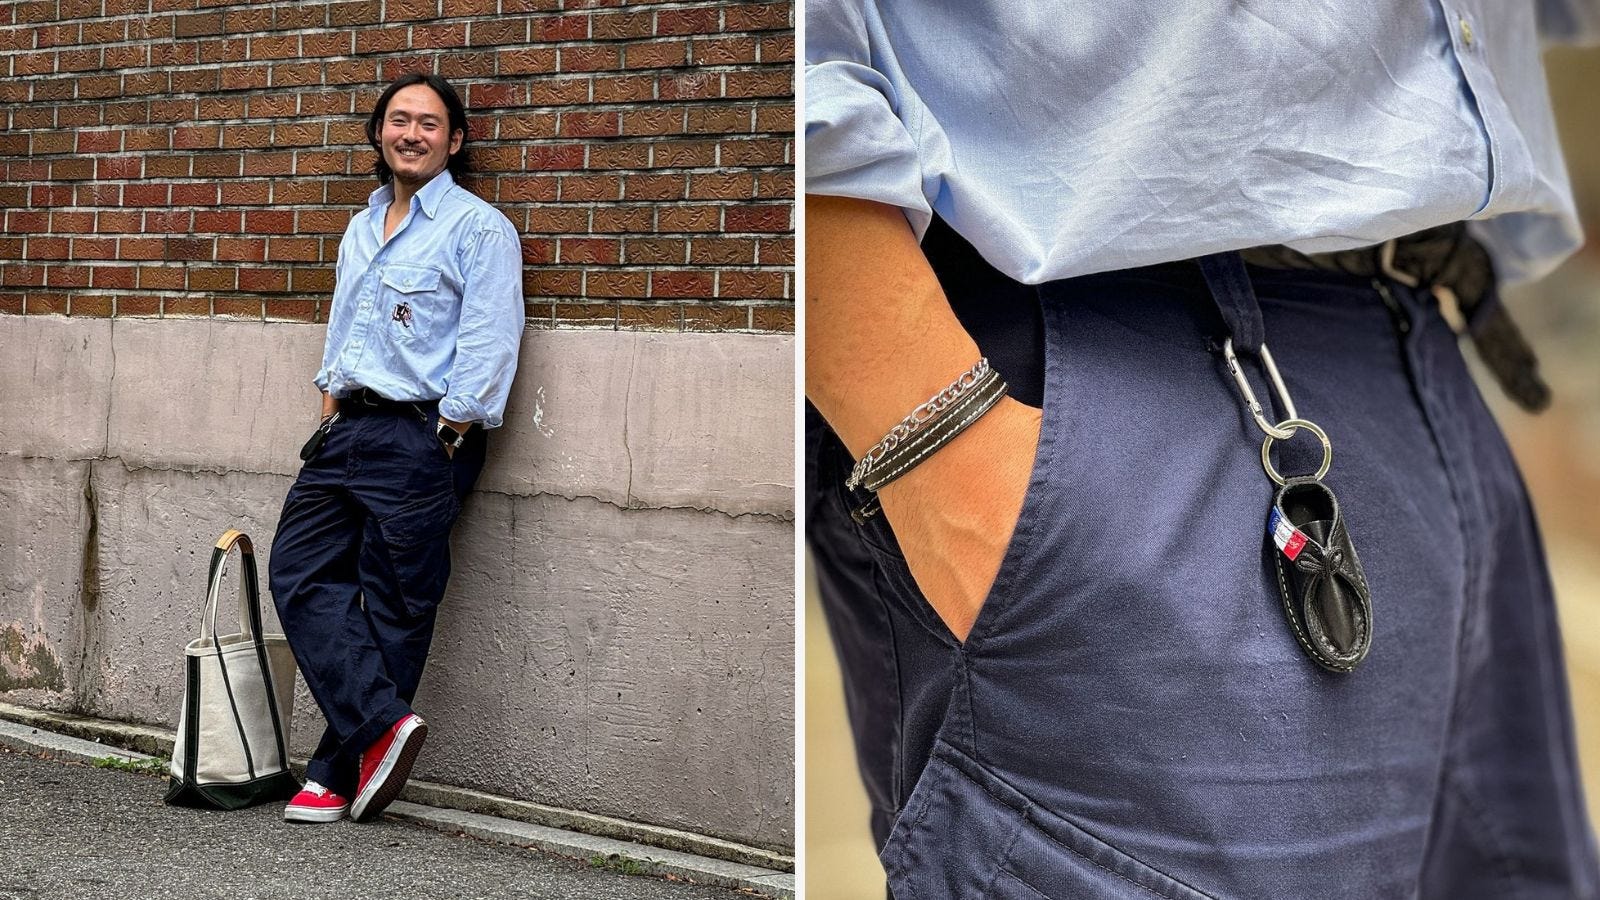 side by side images of a man wearing a blue shirt, dark pants, and red sneakers on the left. on the right, a close-up of his hand in his pocket showing off a bracelet, belt, and shoe keychain hanging from a belt loop